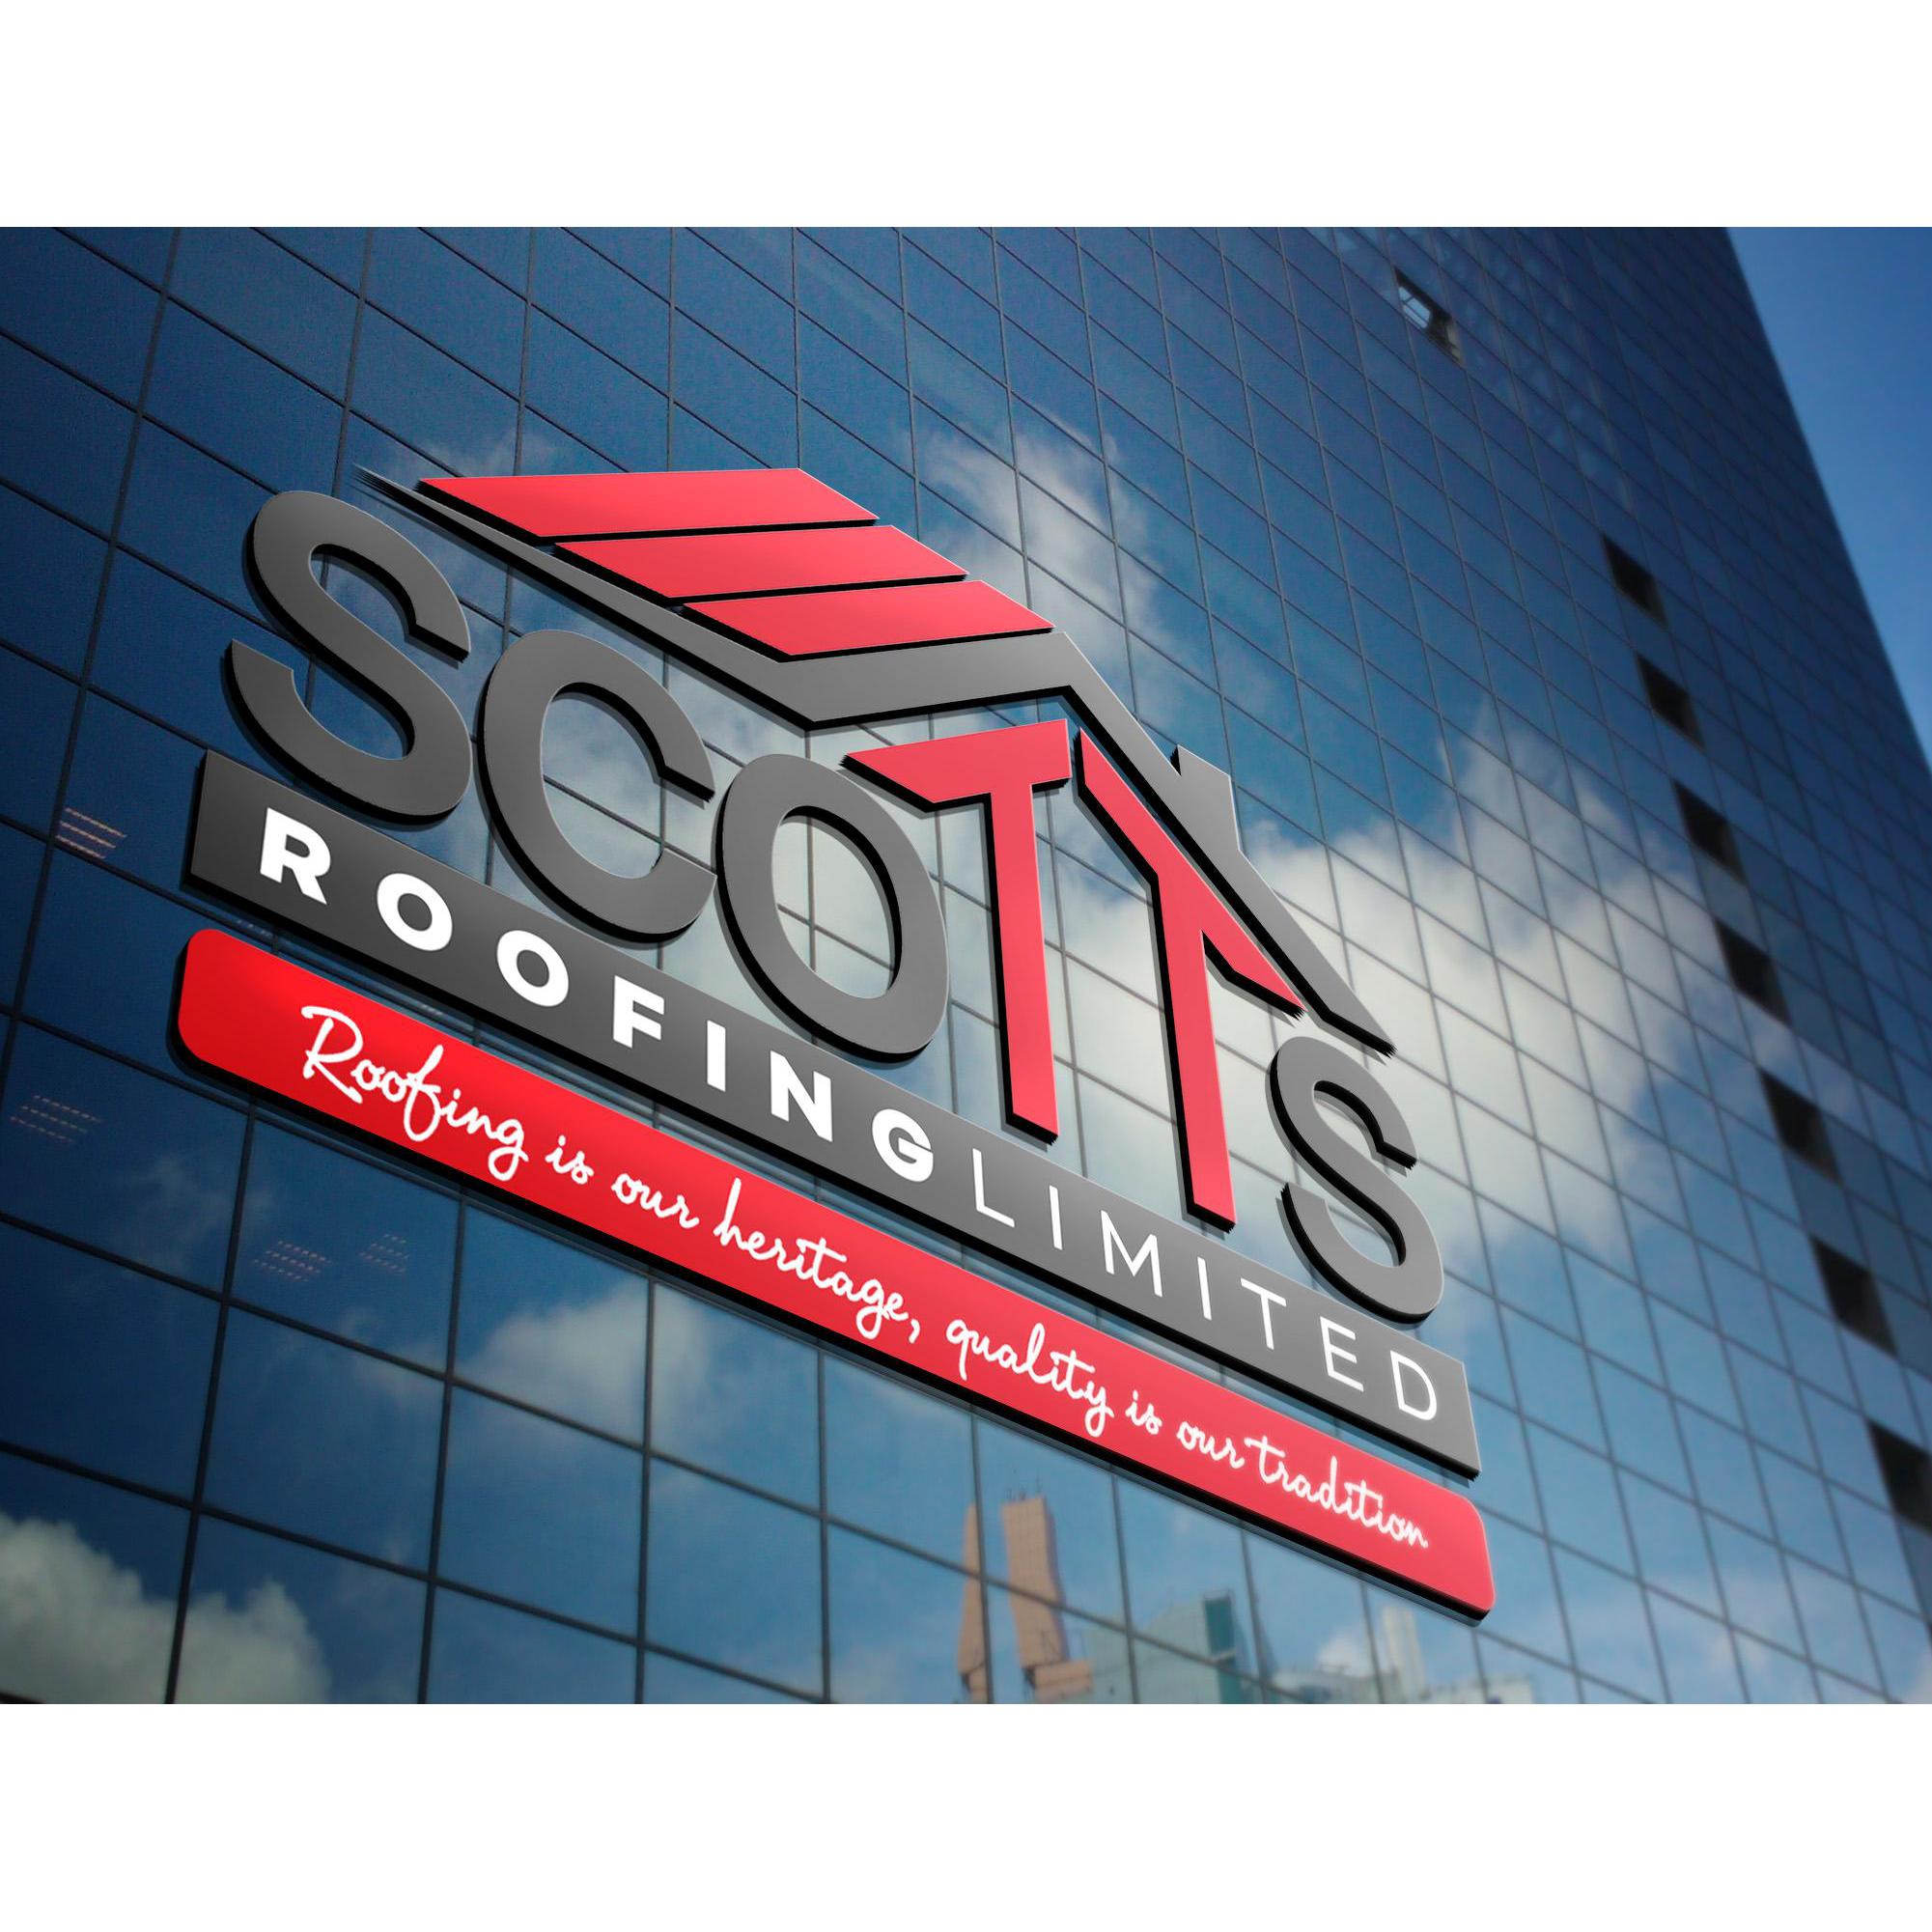 Scotts Roofing Ltd - High Wycombe, Buckinghamshire HP13 6HH - 01494 474181 | ShowMeLocal.com